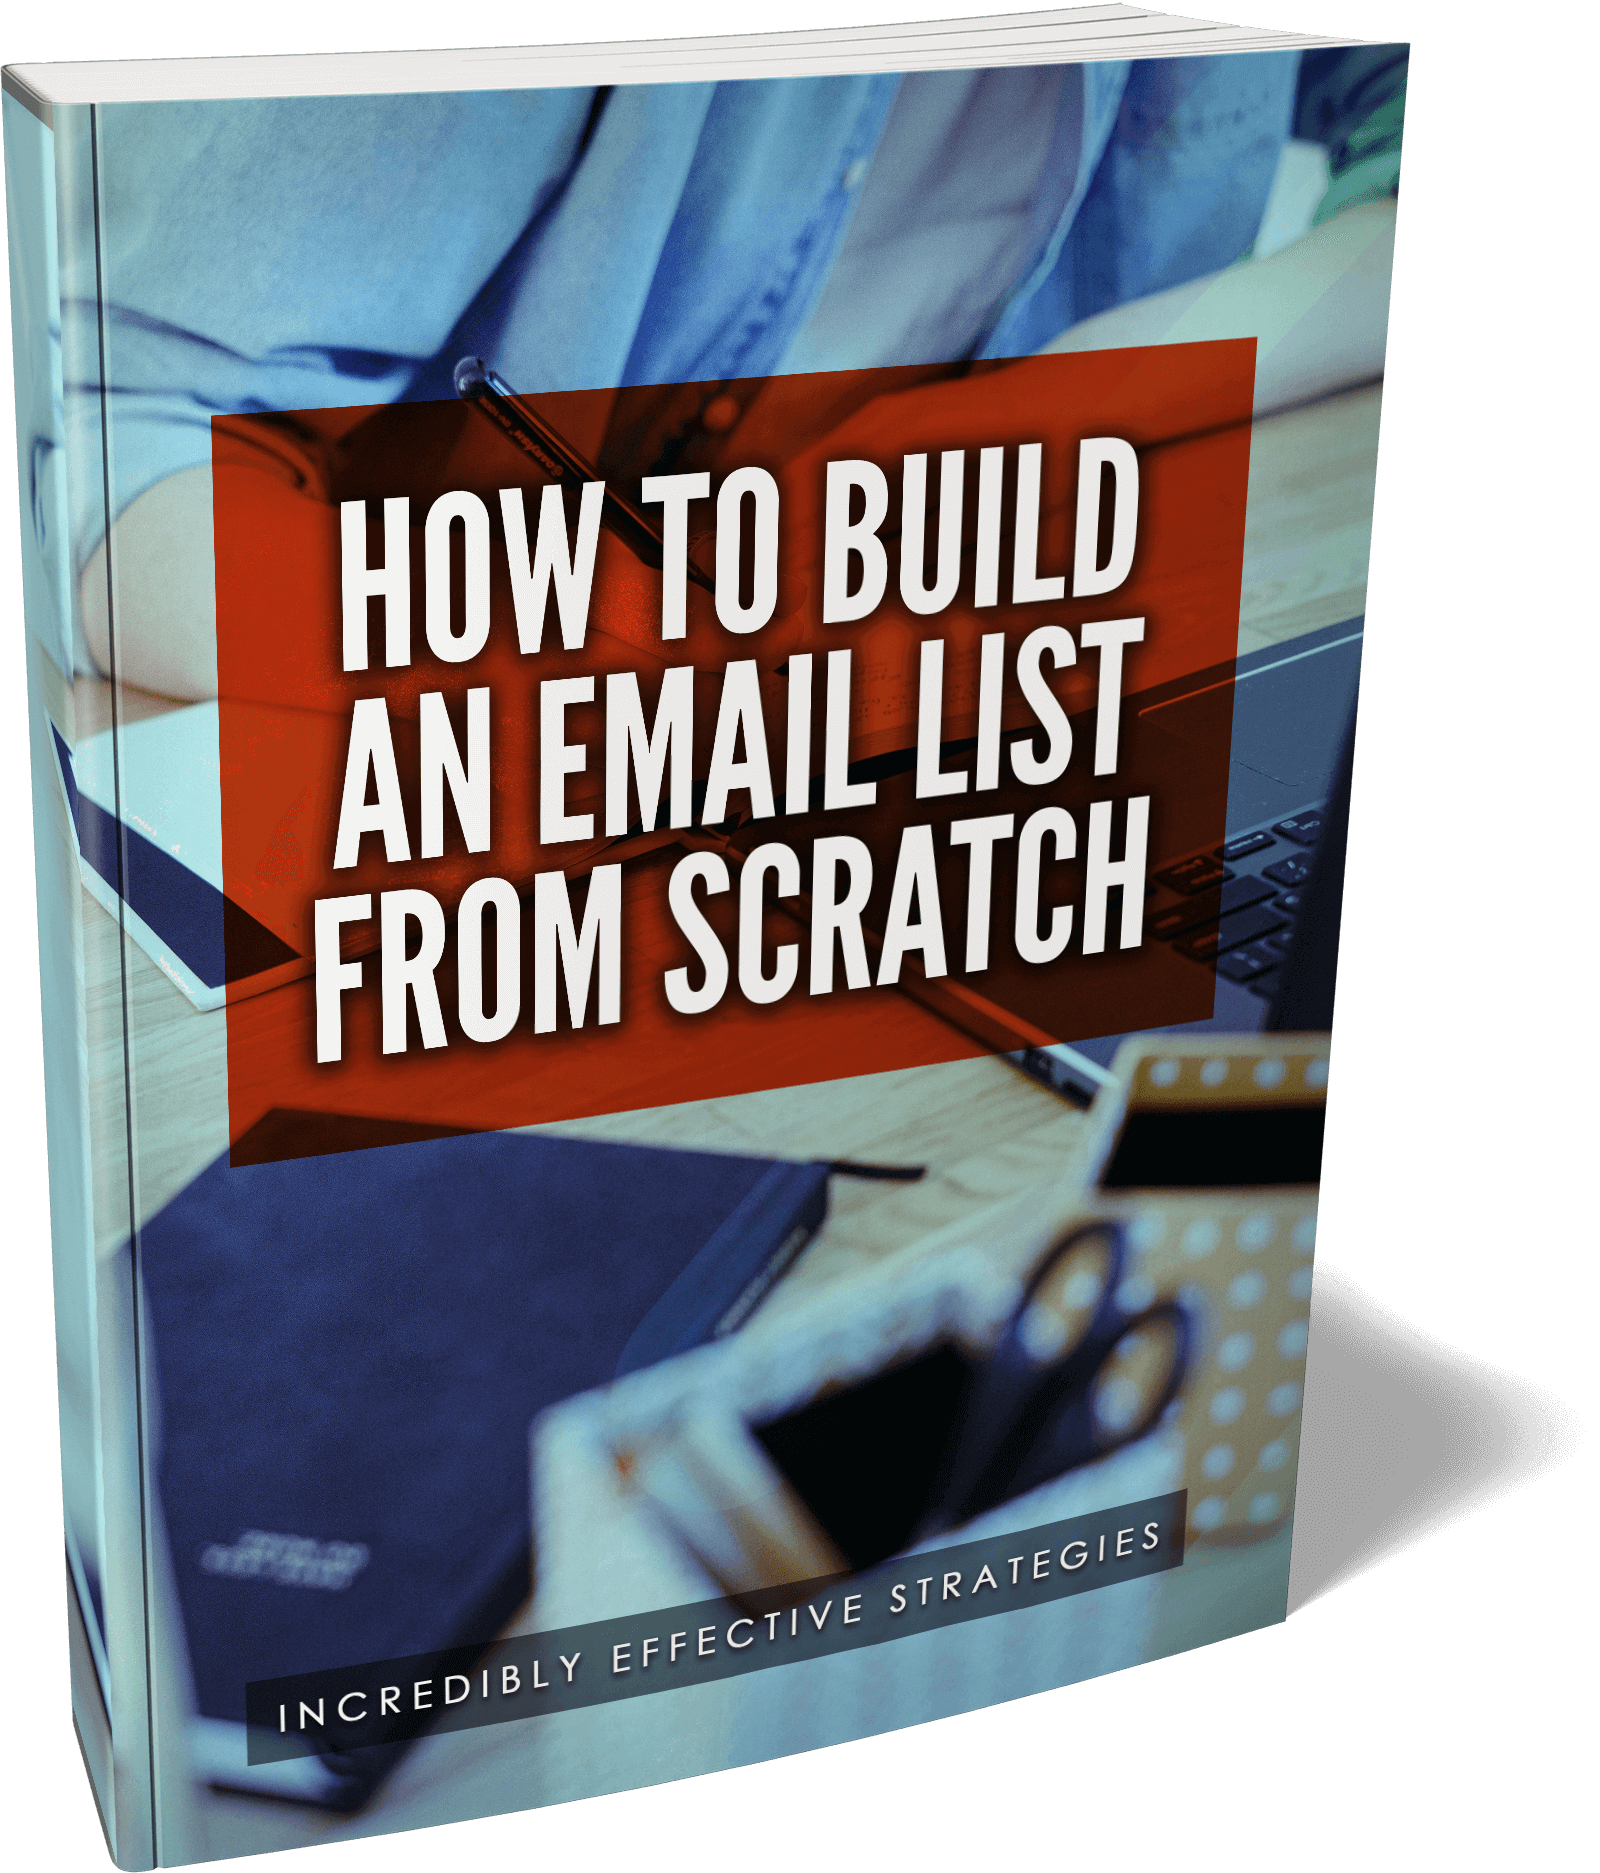 How To Build An Email List From Scratch
 